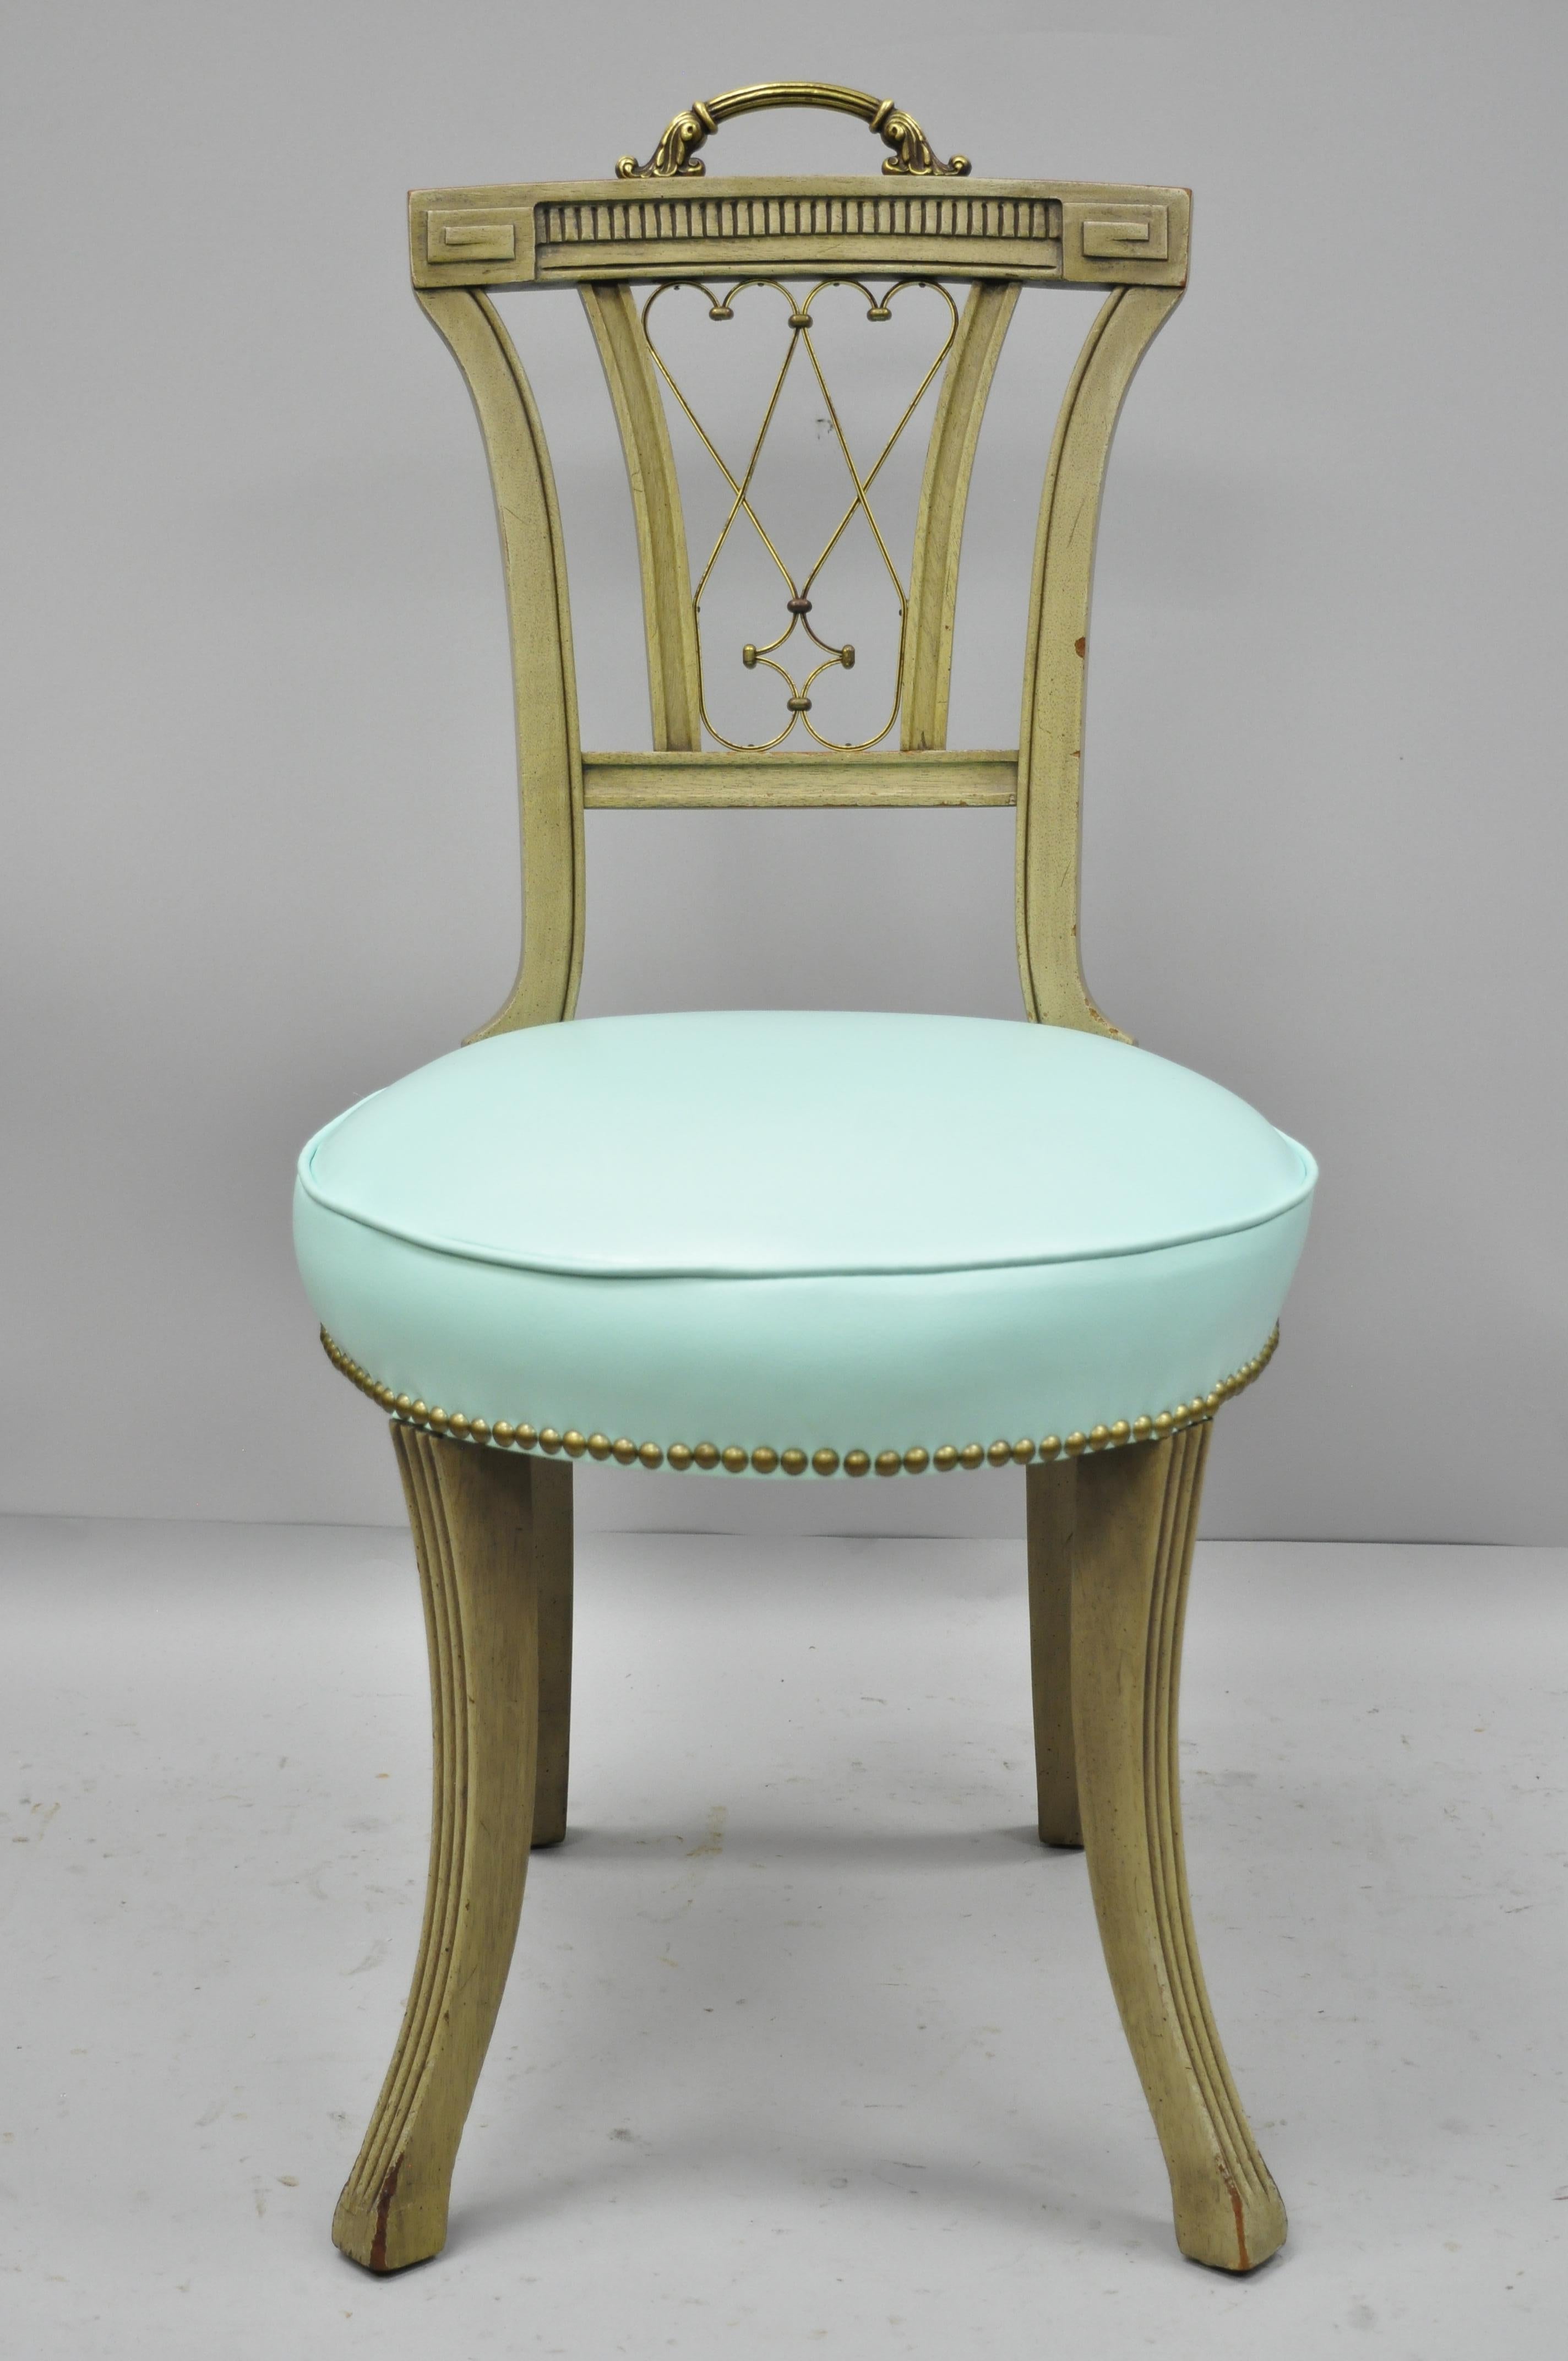 Carved mahogany French Regency style chair with brass handle and aqua blue vinyl. Item features ornate brass handle, brass decorated 